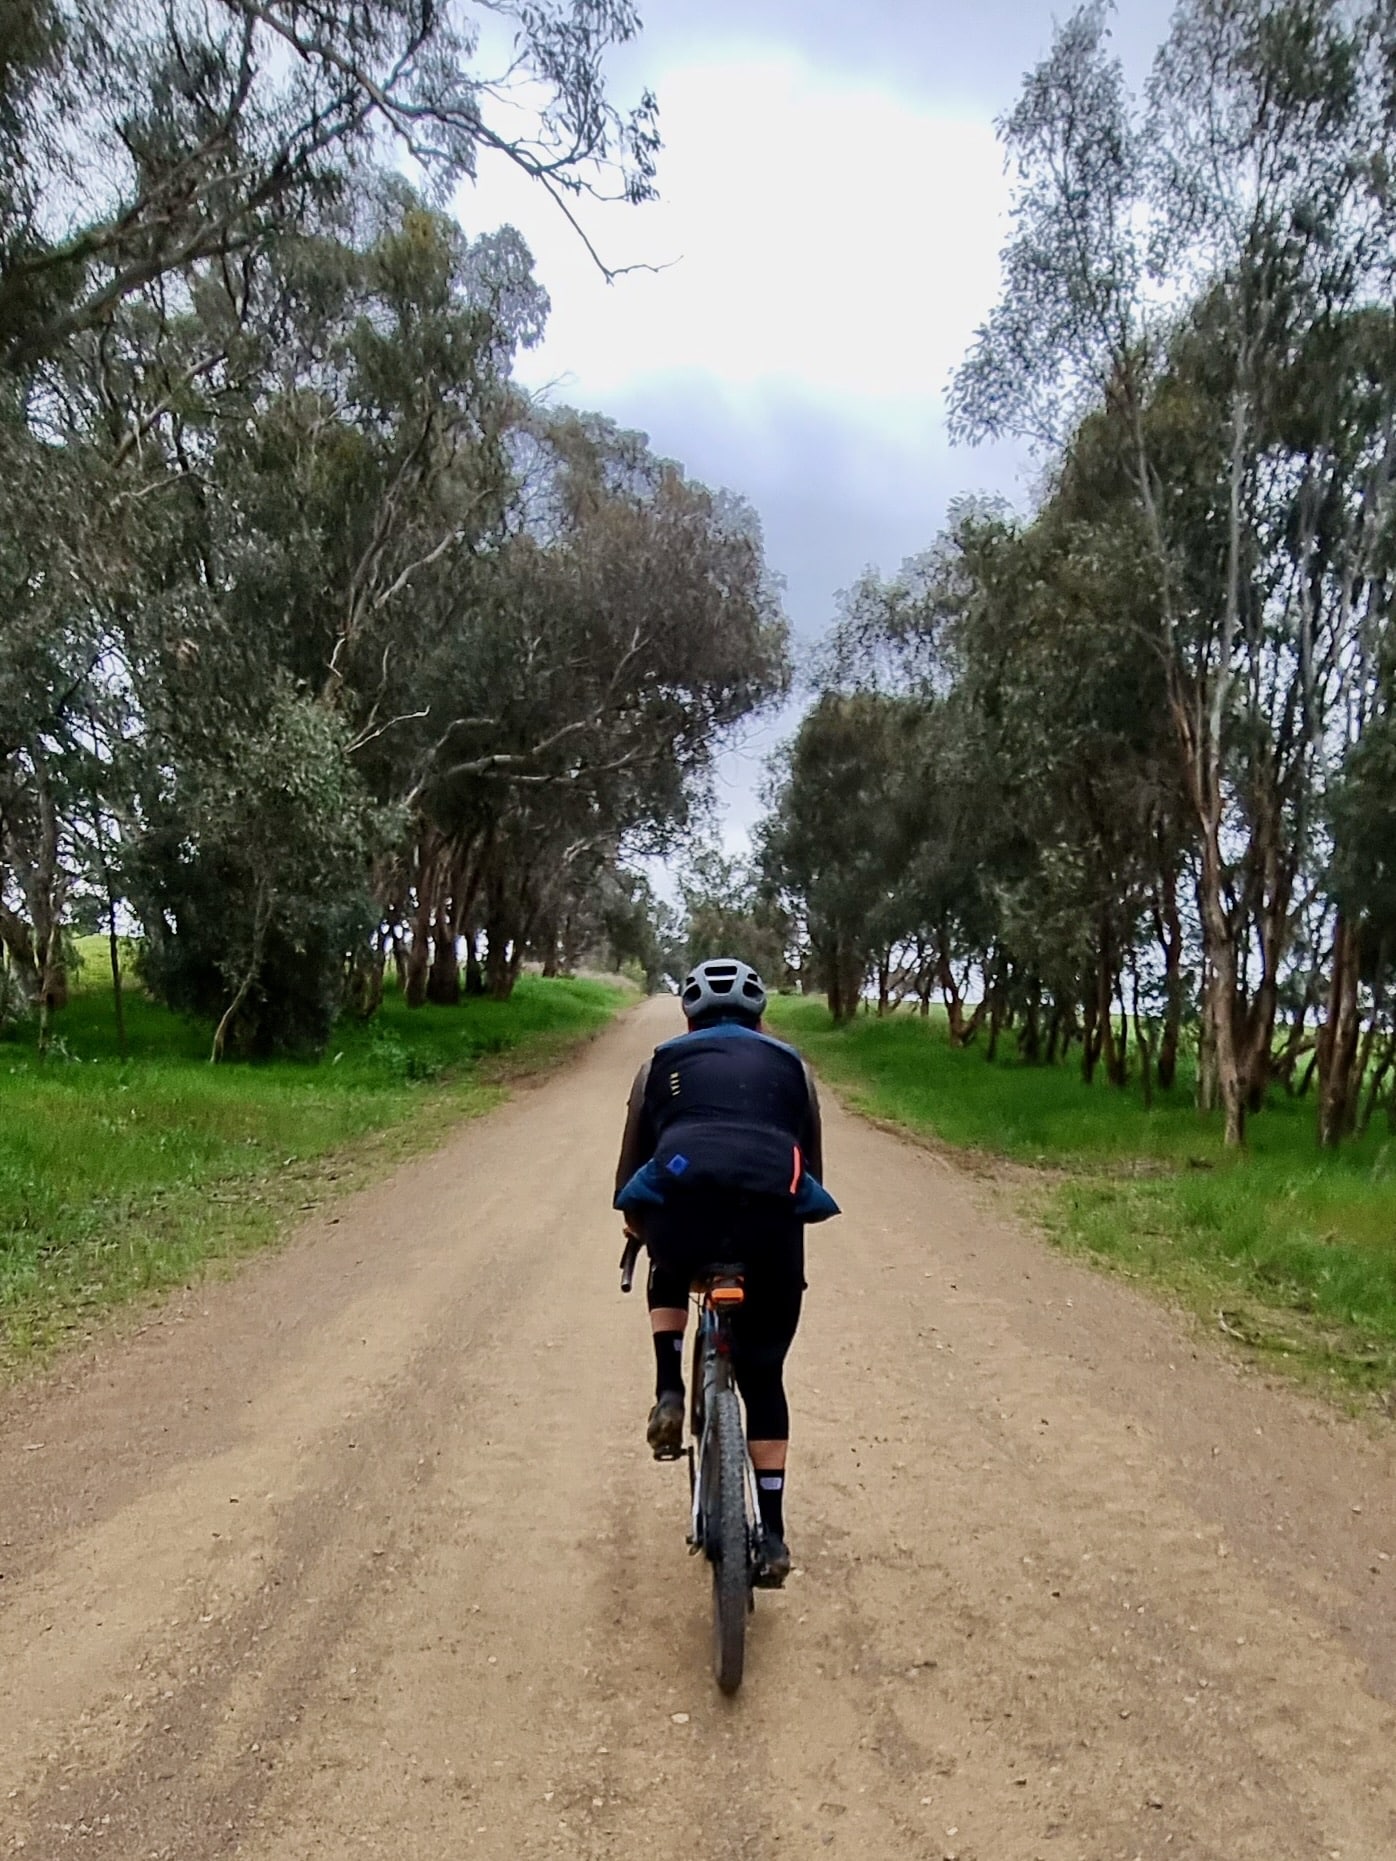 Gravel cyclist riding on smooth gravel road surrounded by native bushland and open farmland